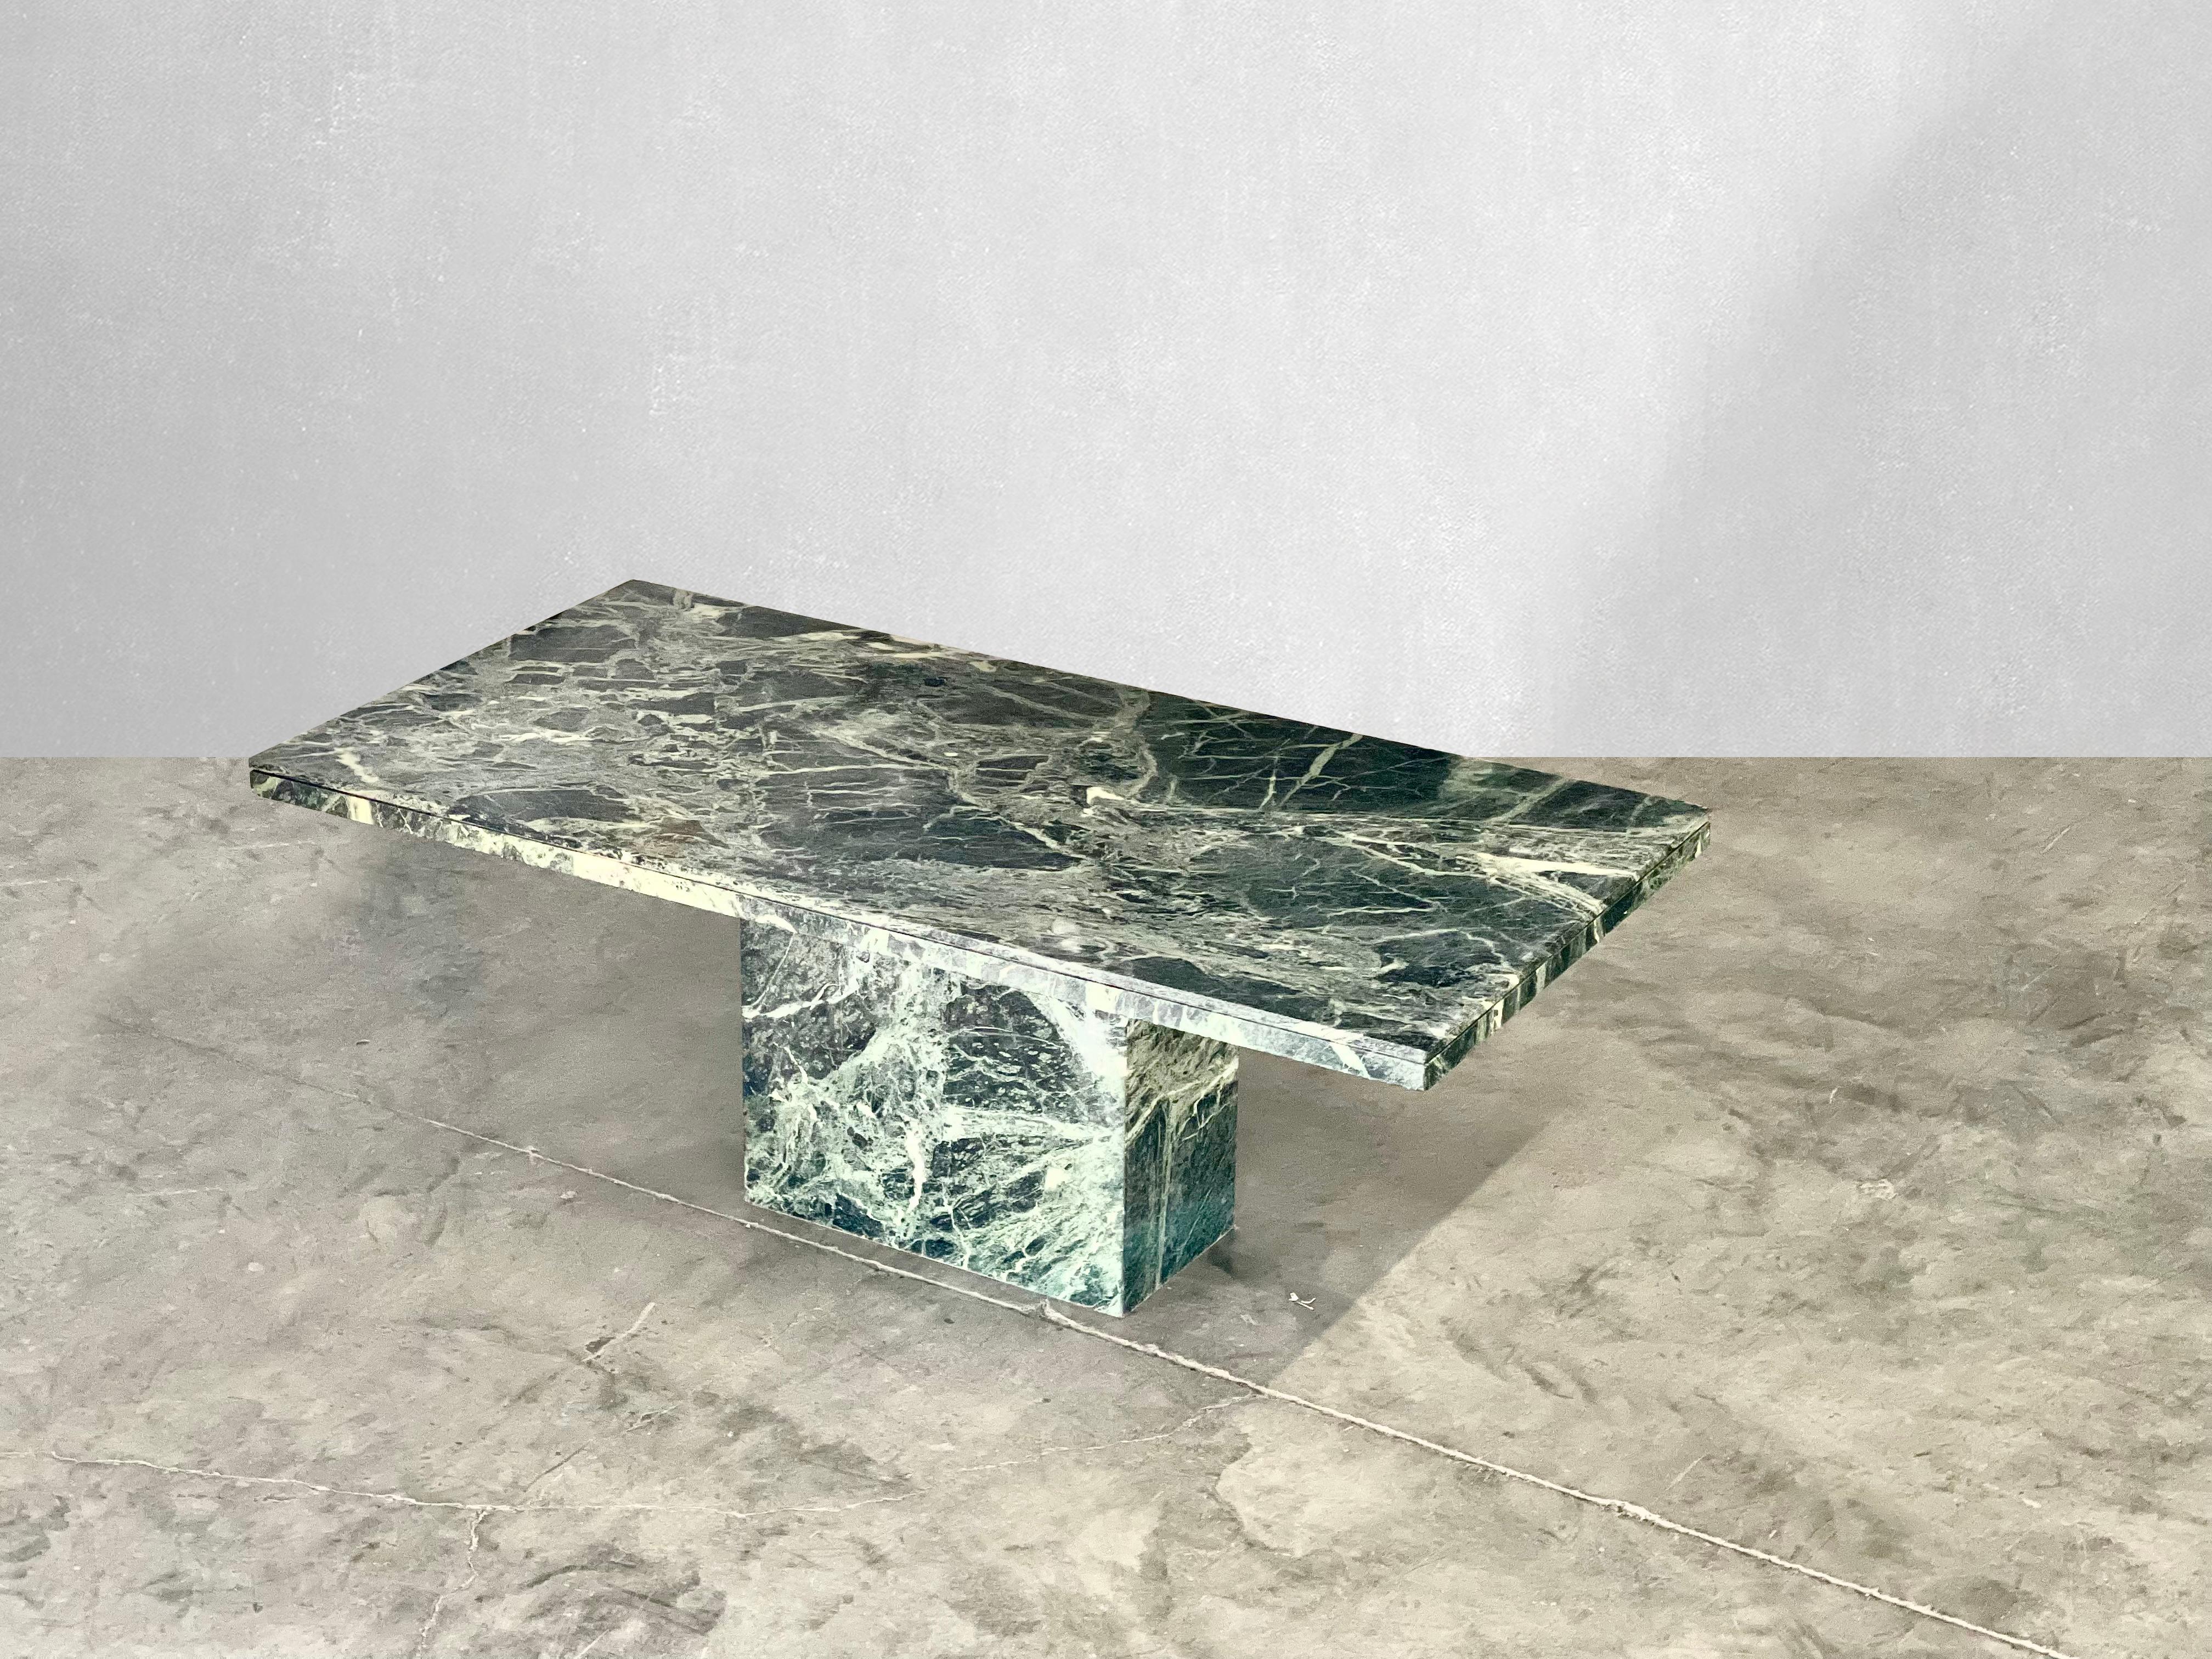 Striking green serpentine marble dining table.

circa 1980.

Rectangular serpentine green marble table with beautiful edge detail and matching base. Love the natural movement and different shades of green. Pairs well with many different styles